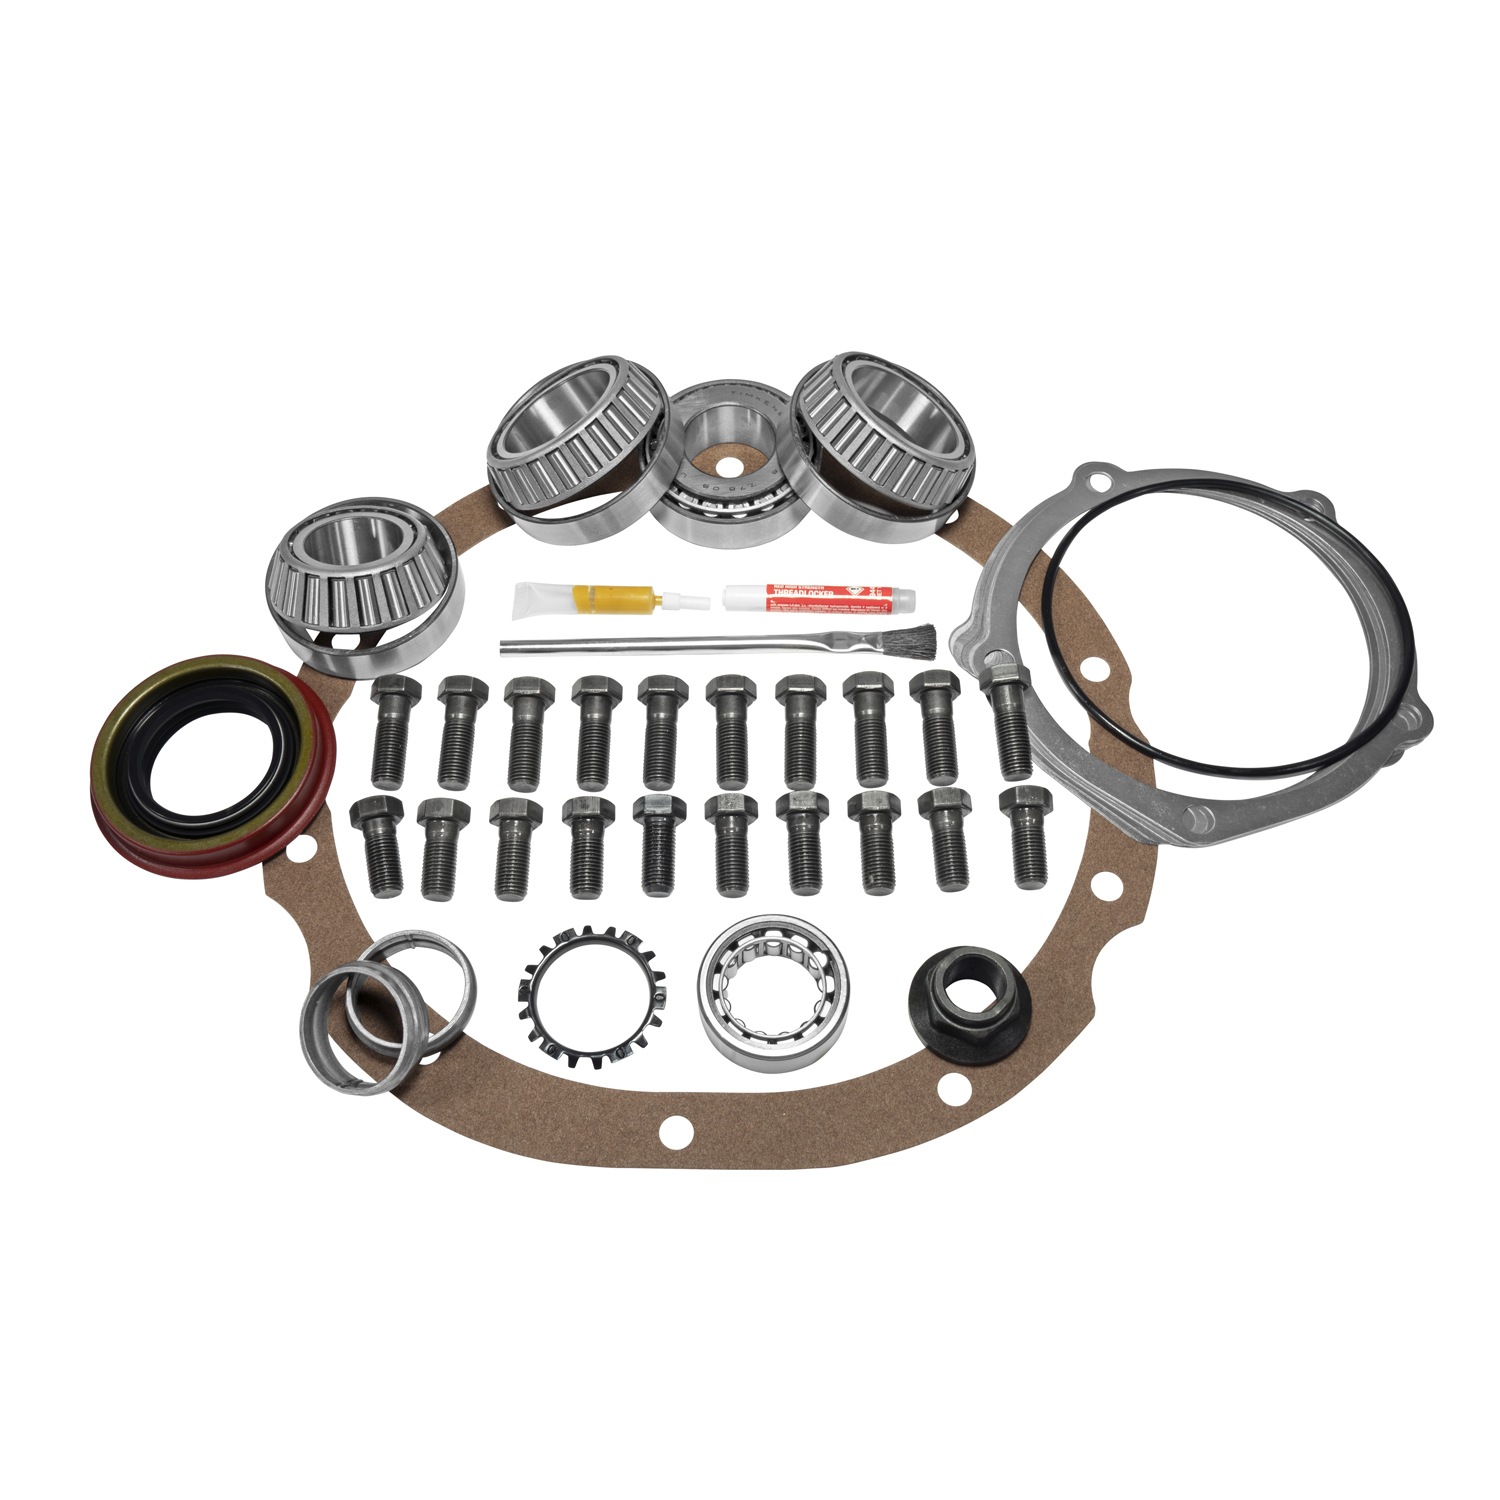 Yukon Master Overhaul kit for Ford 9" LM102910 differential 